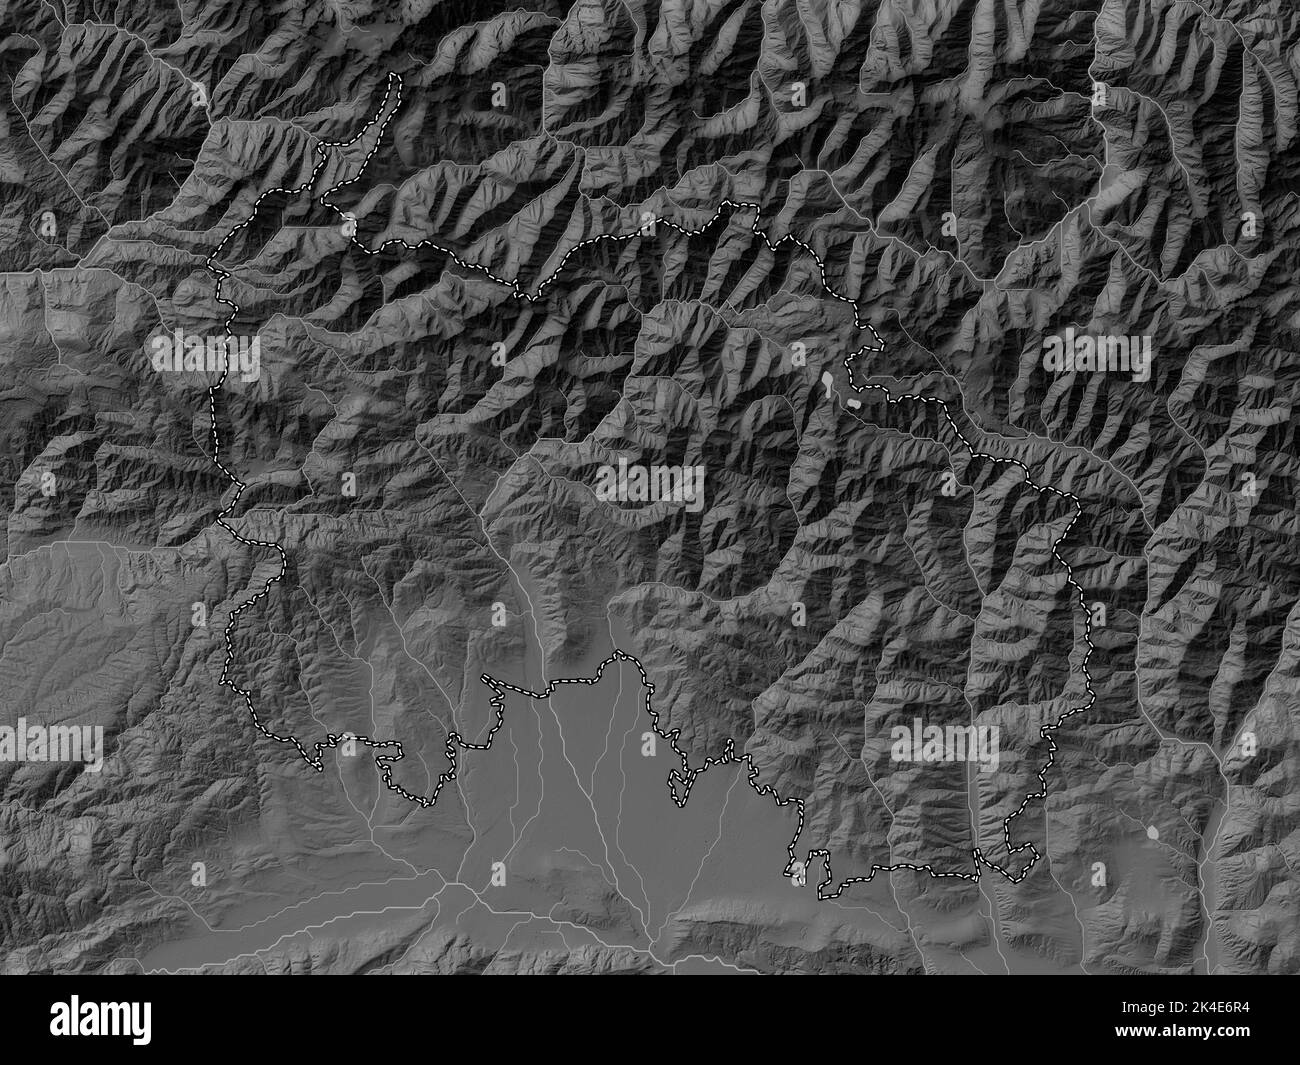 South Ossetia, independent city of Georgia. Grayscale elevation map with lakes and rivers Stock Photo